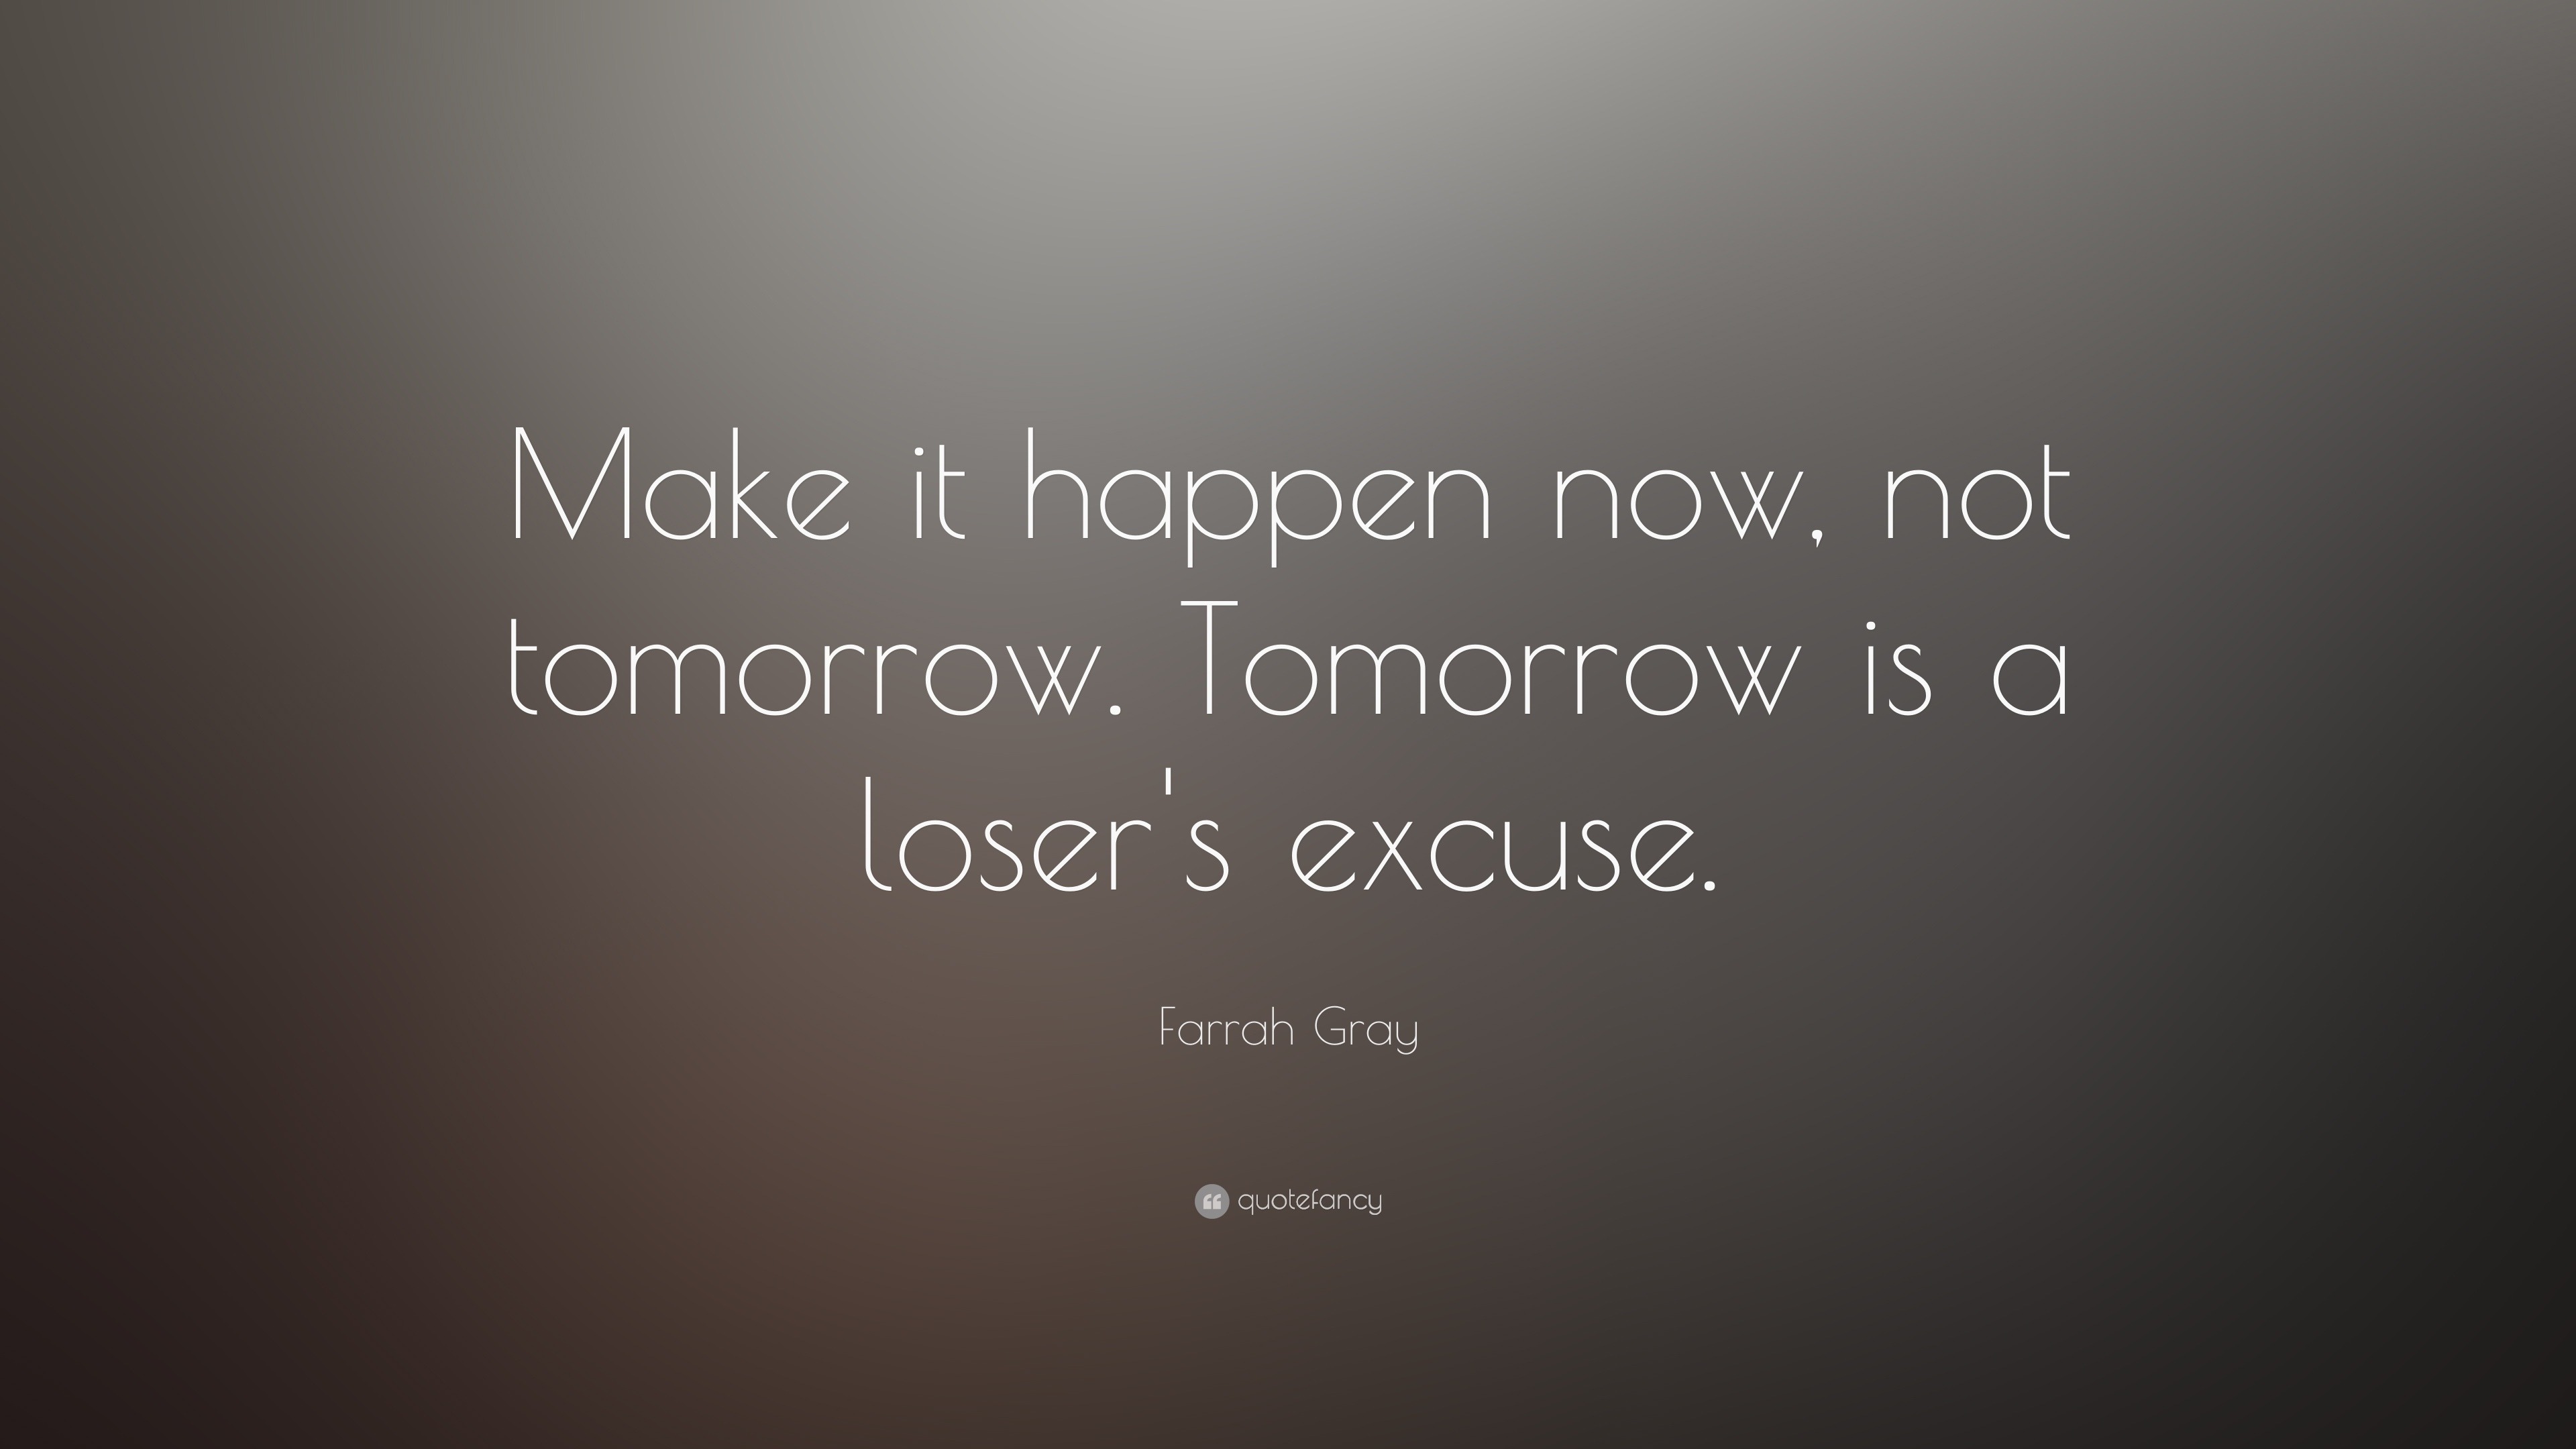 Farrah Gray Quote: “Make it happen now, not tomorrow. Tomorrow is a